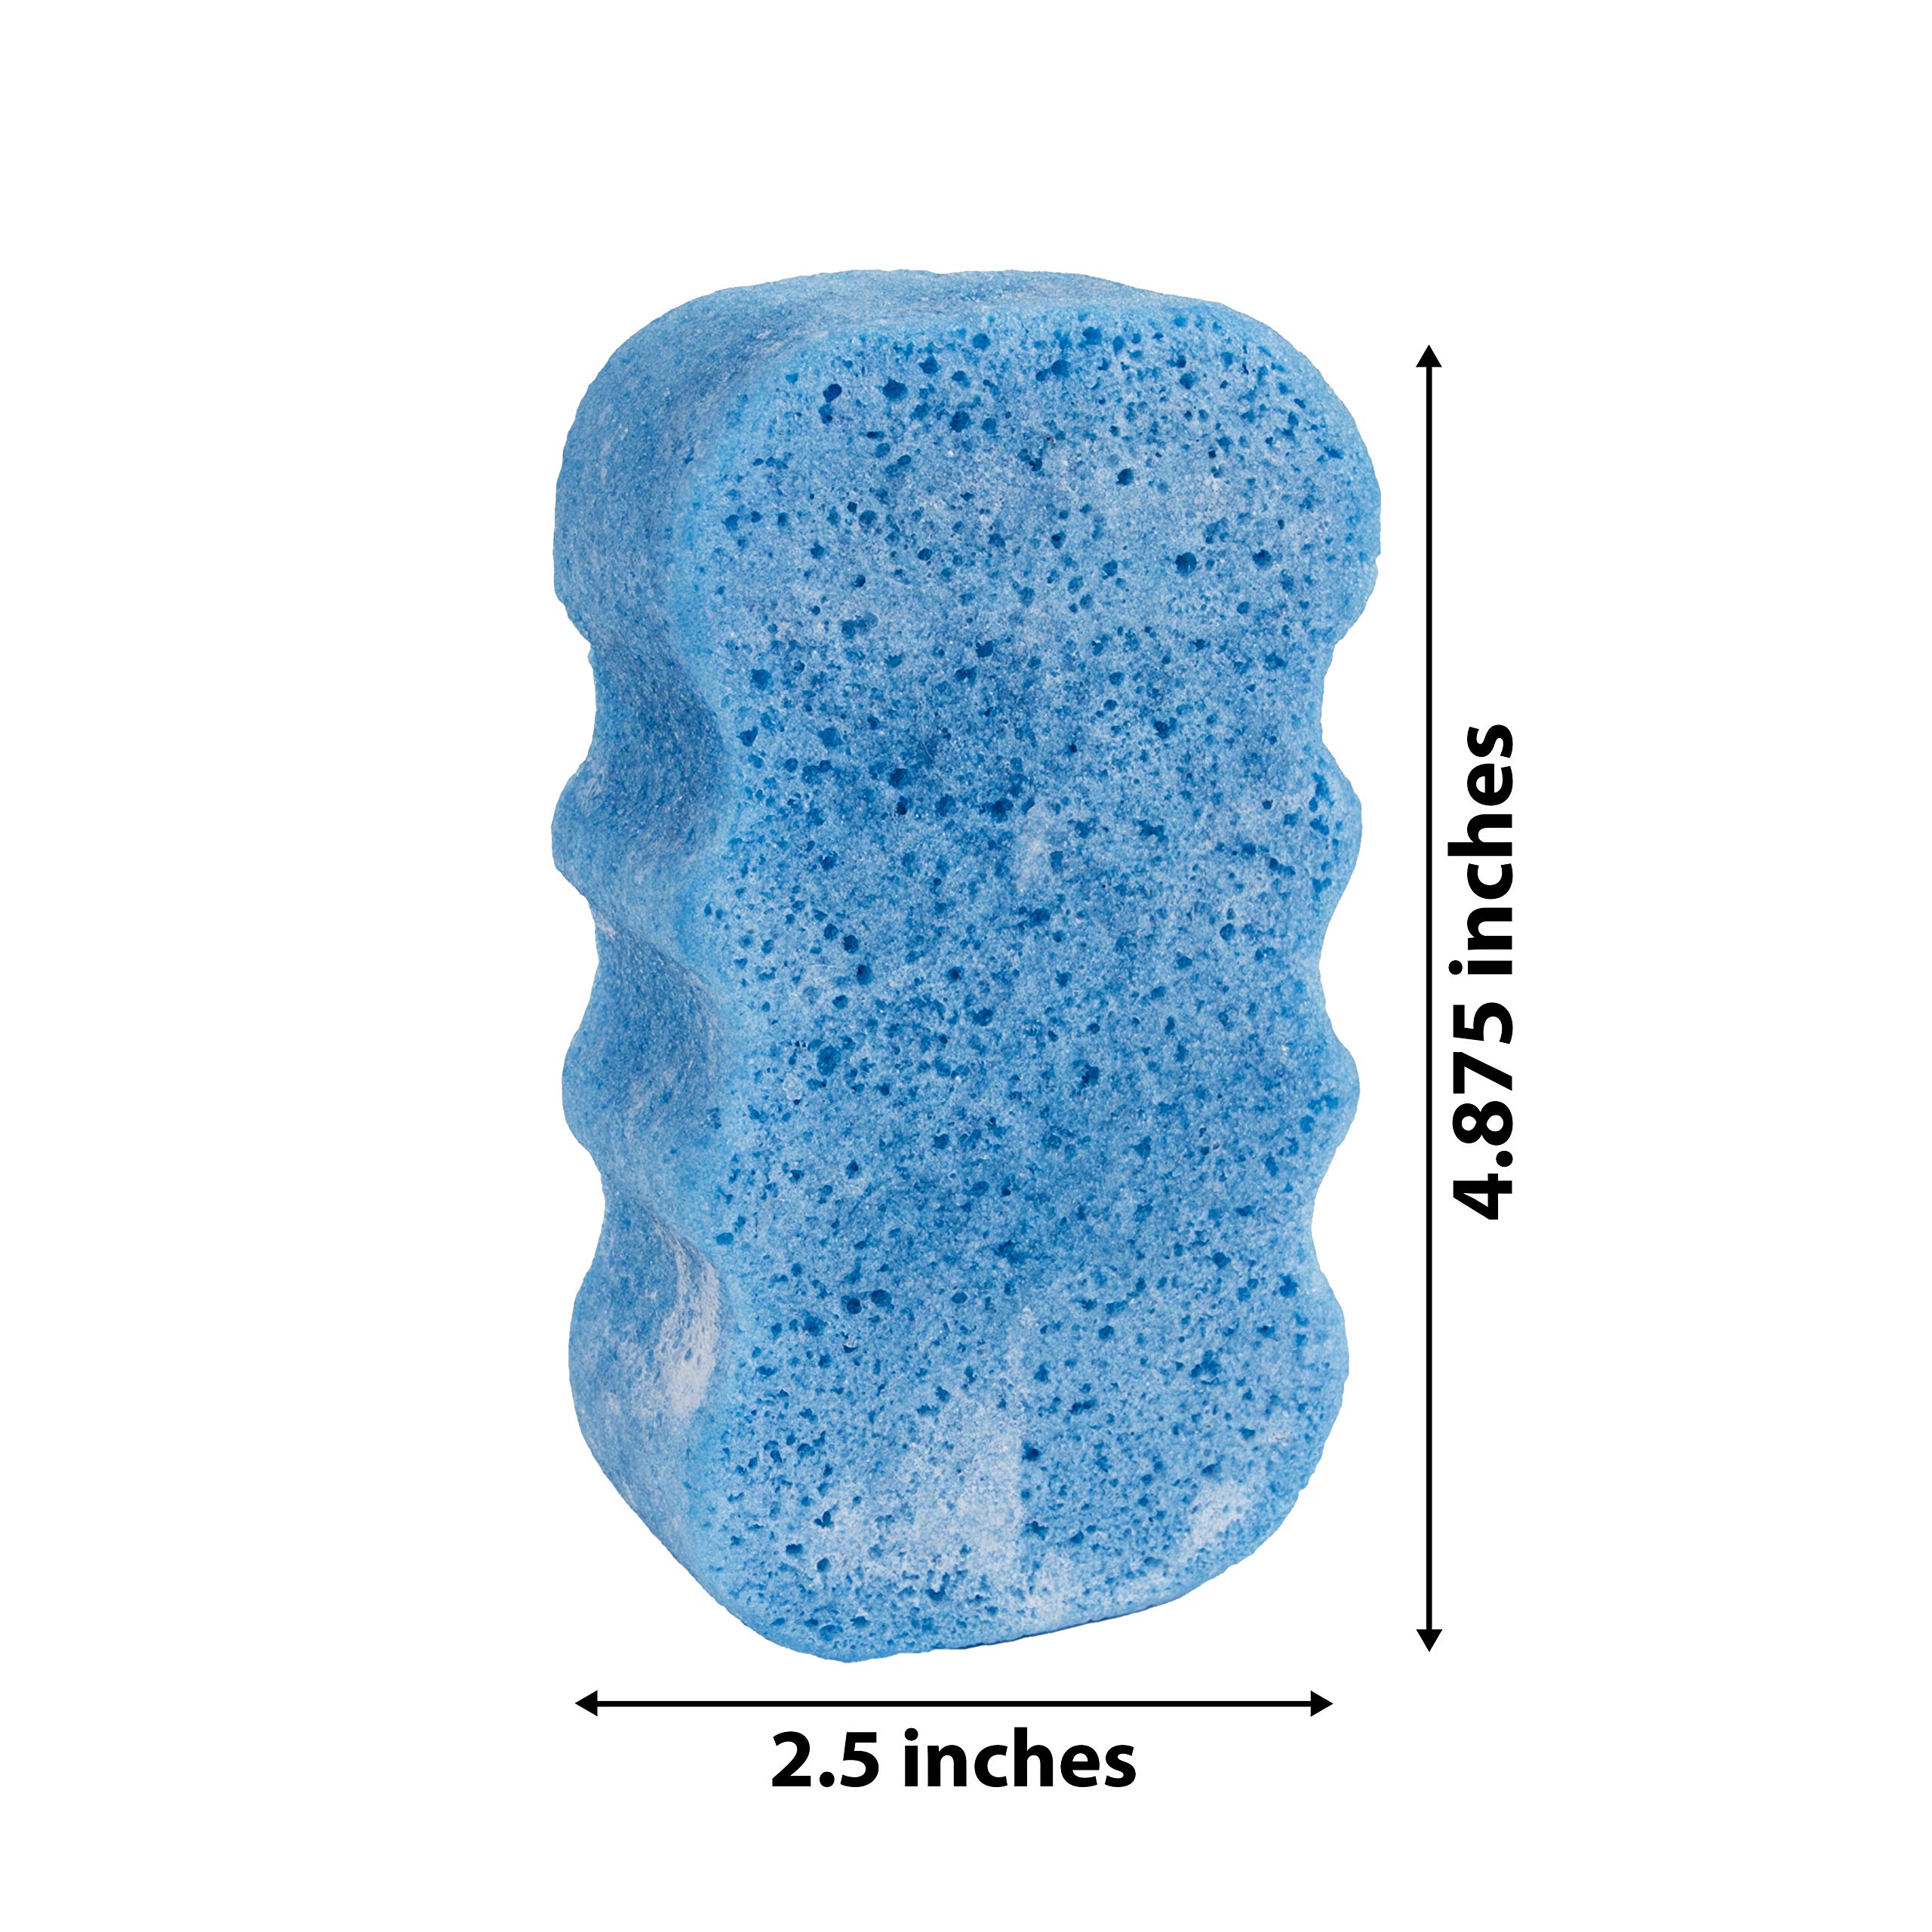 Spongeables Body Wash in a Sponge, Clean & Fresh Scent, Moisturizer for the Body, 3.5 Ounce, 20 + washes